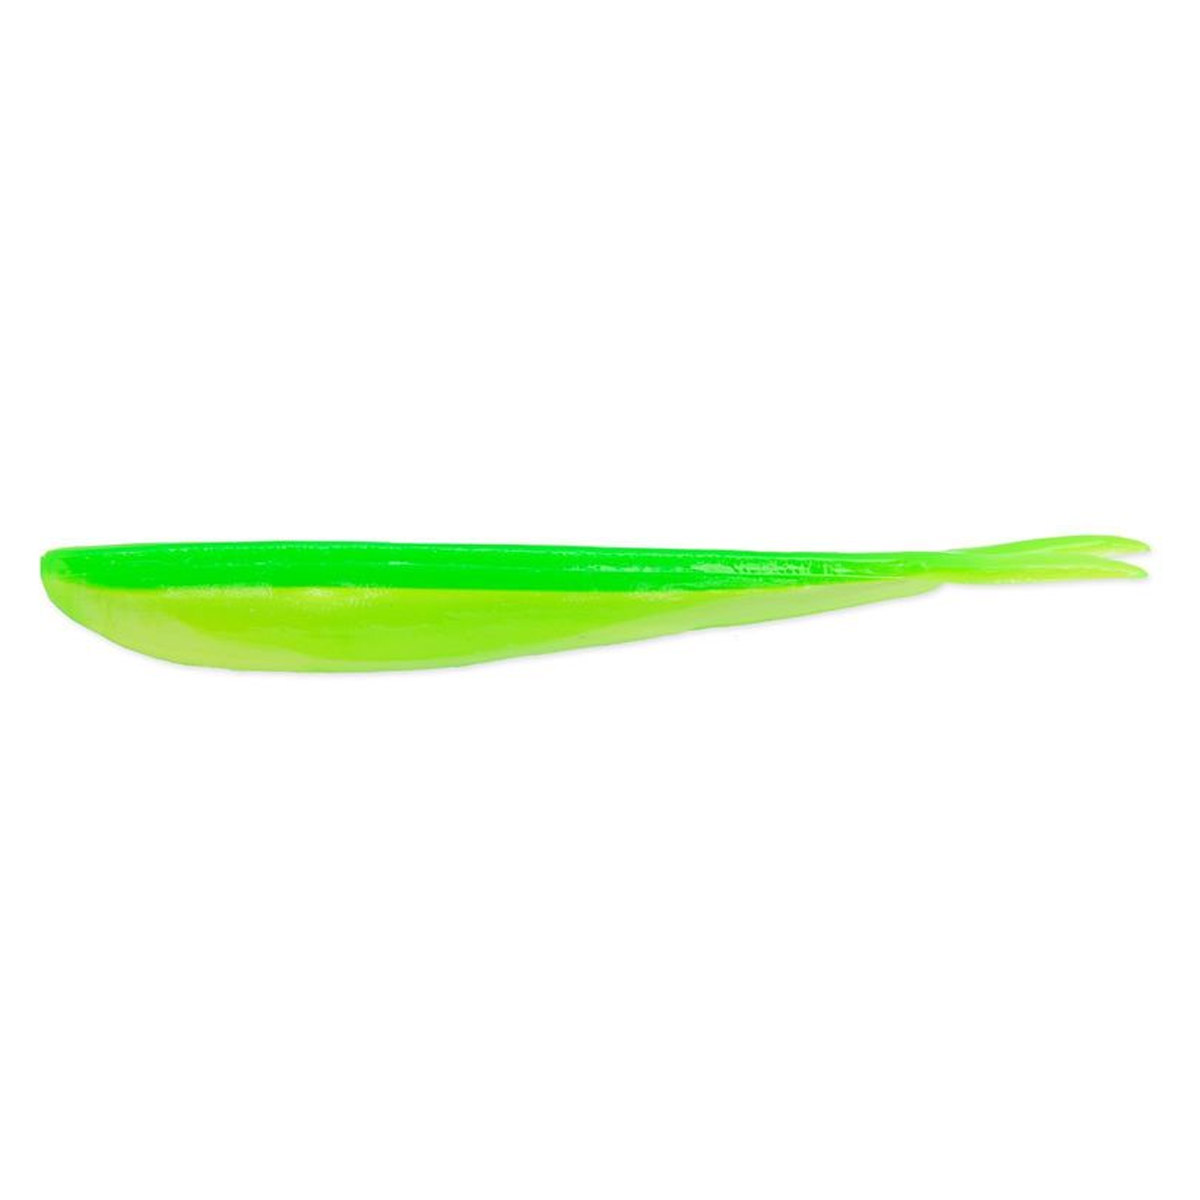 Lunker City Fin-S Fish 7 Inch  -  Limetreuse